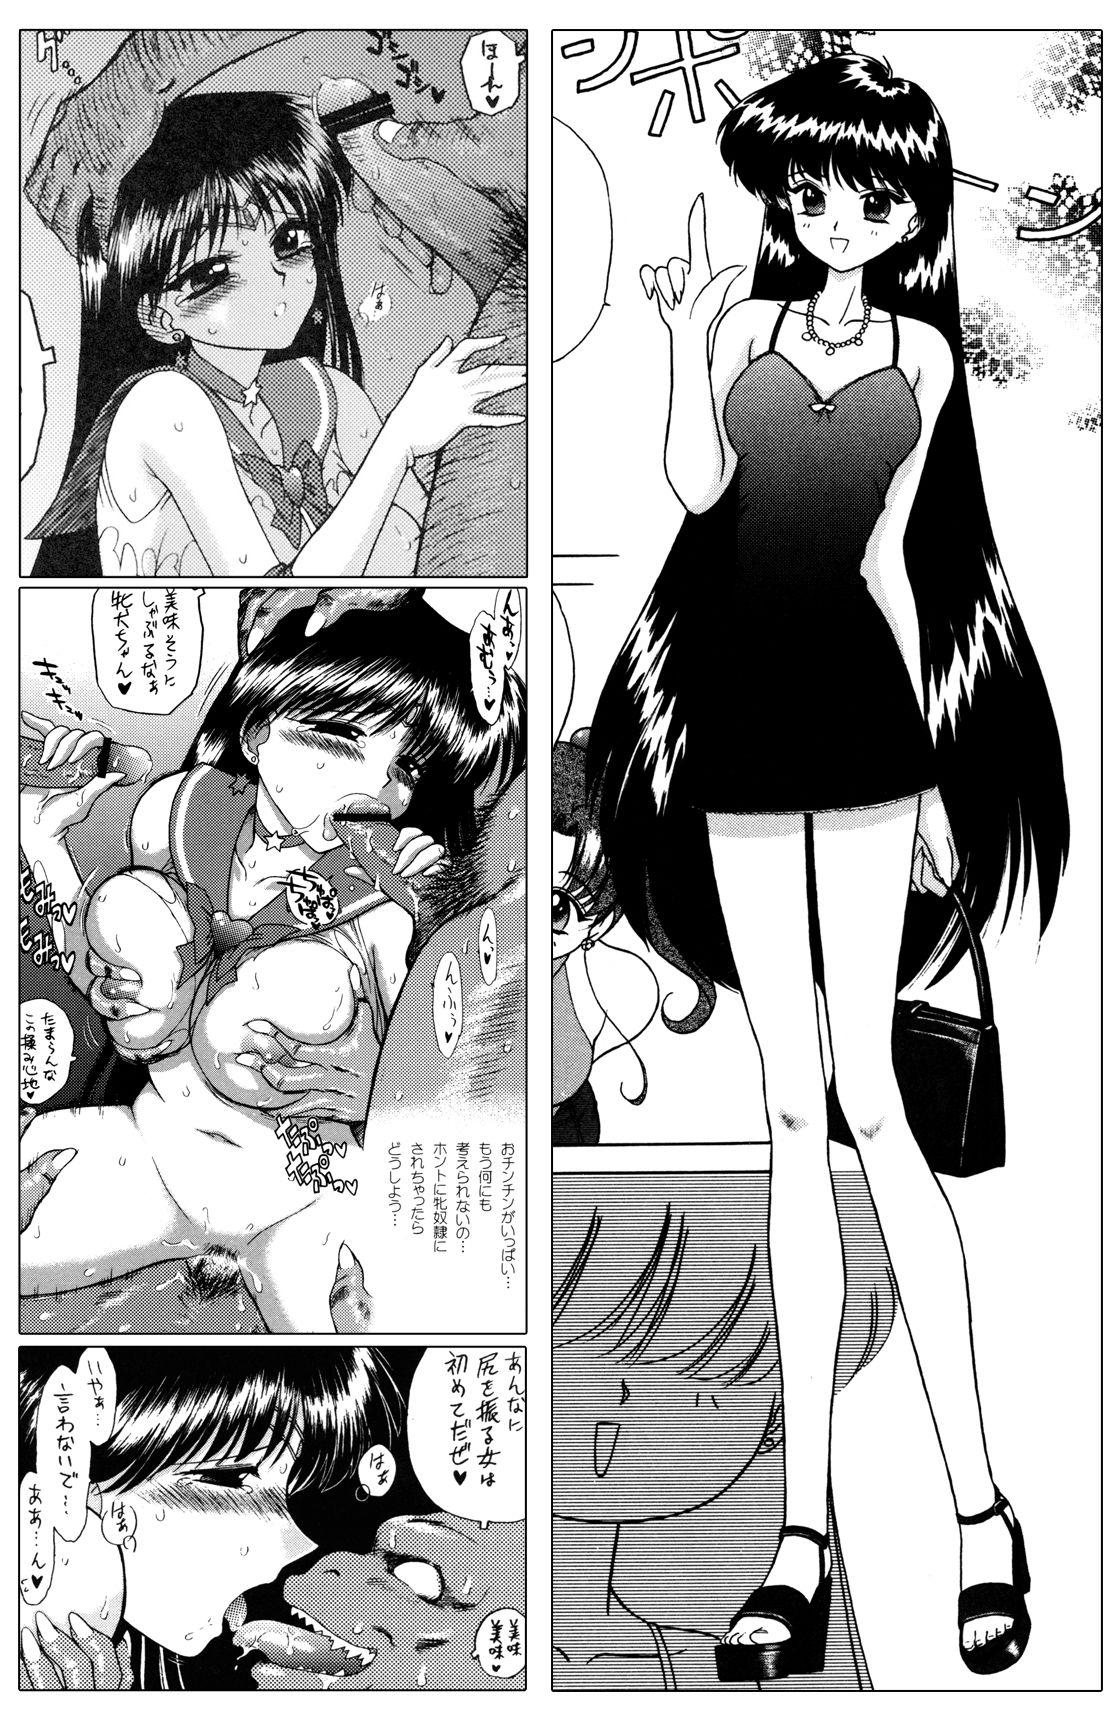 Couch QUEEN OF SPADES - 黑桃皇后 - Sailor moon Suck - Page 12